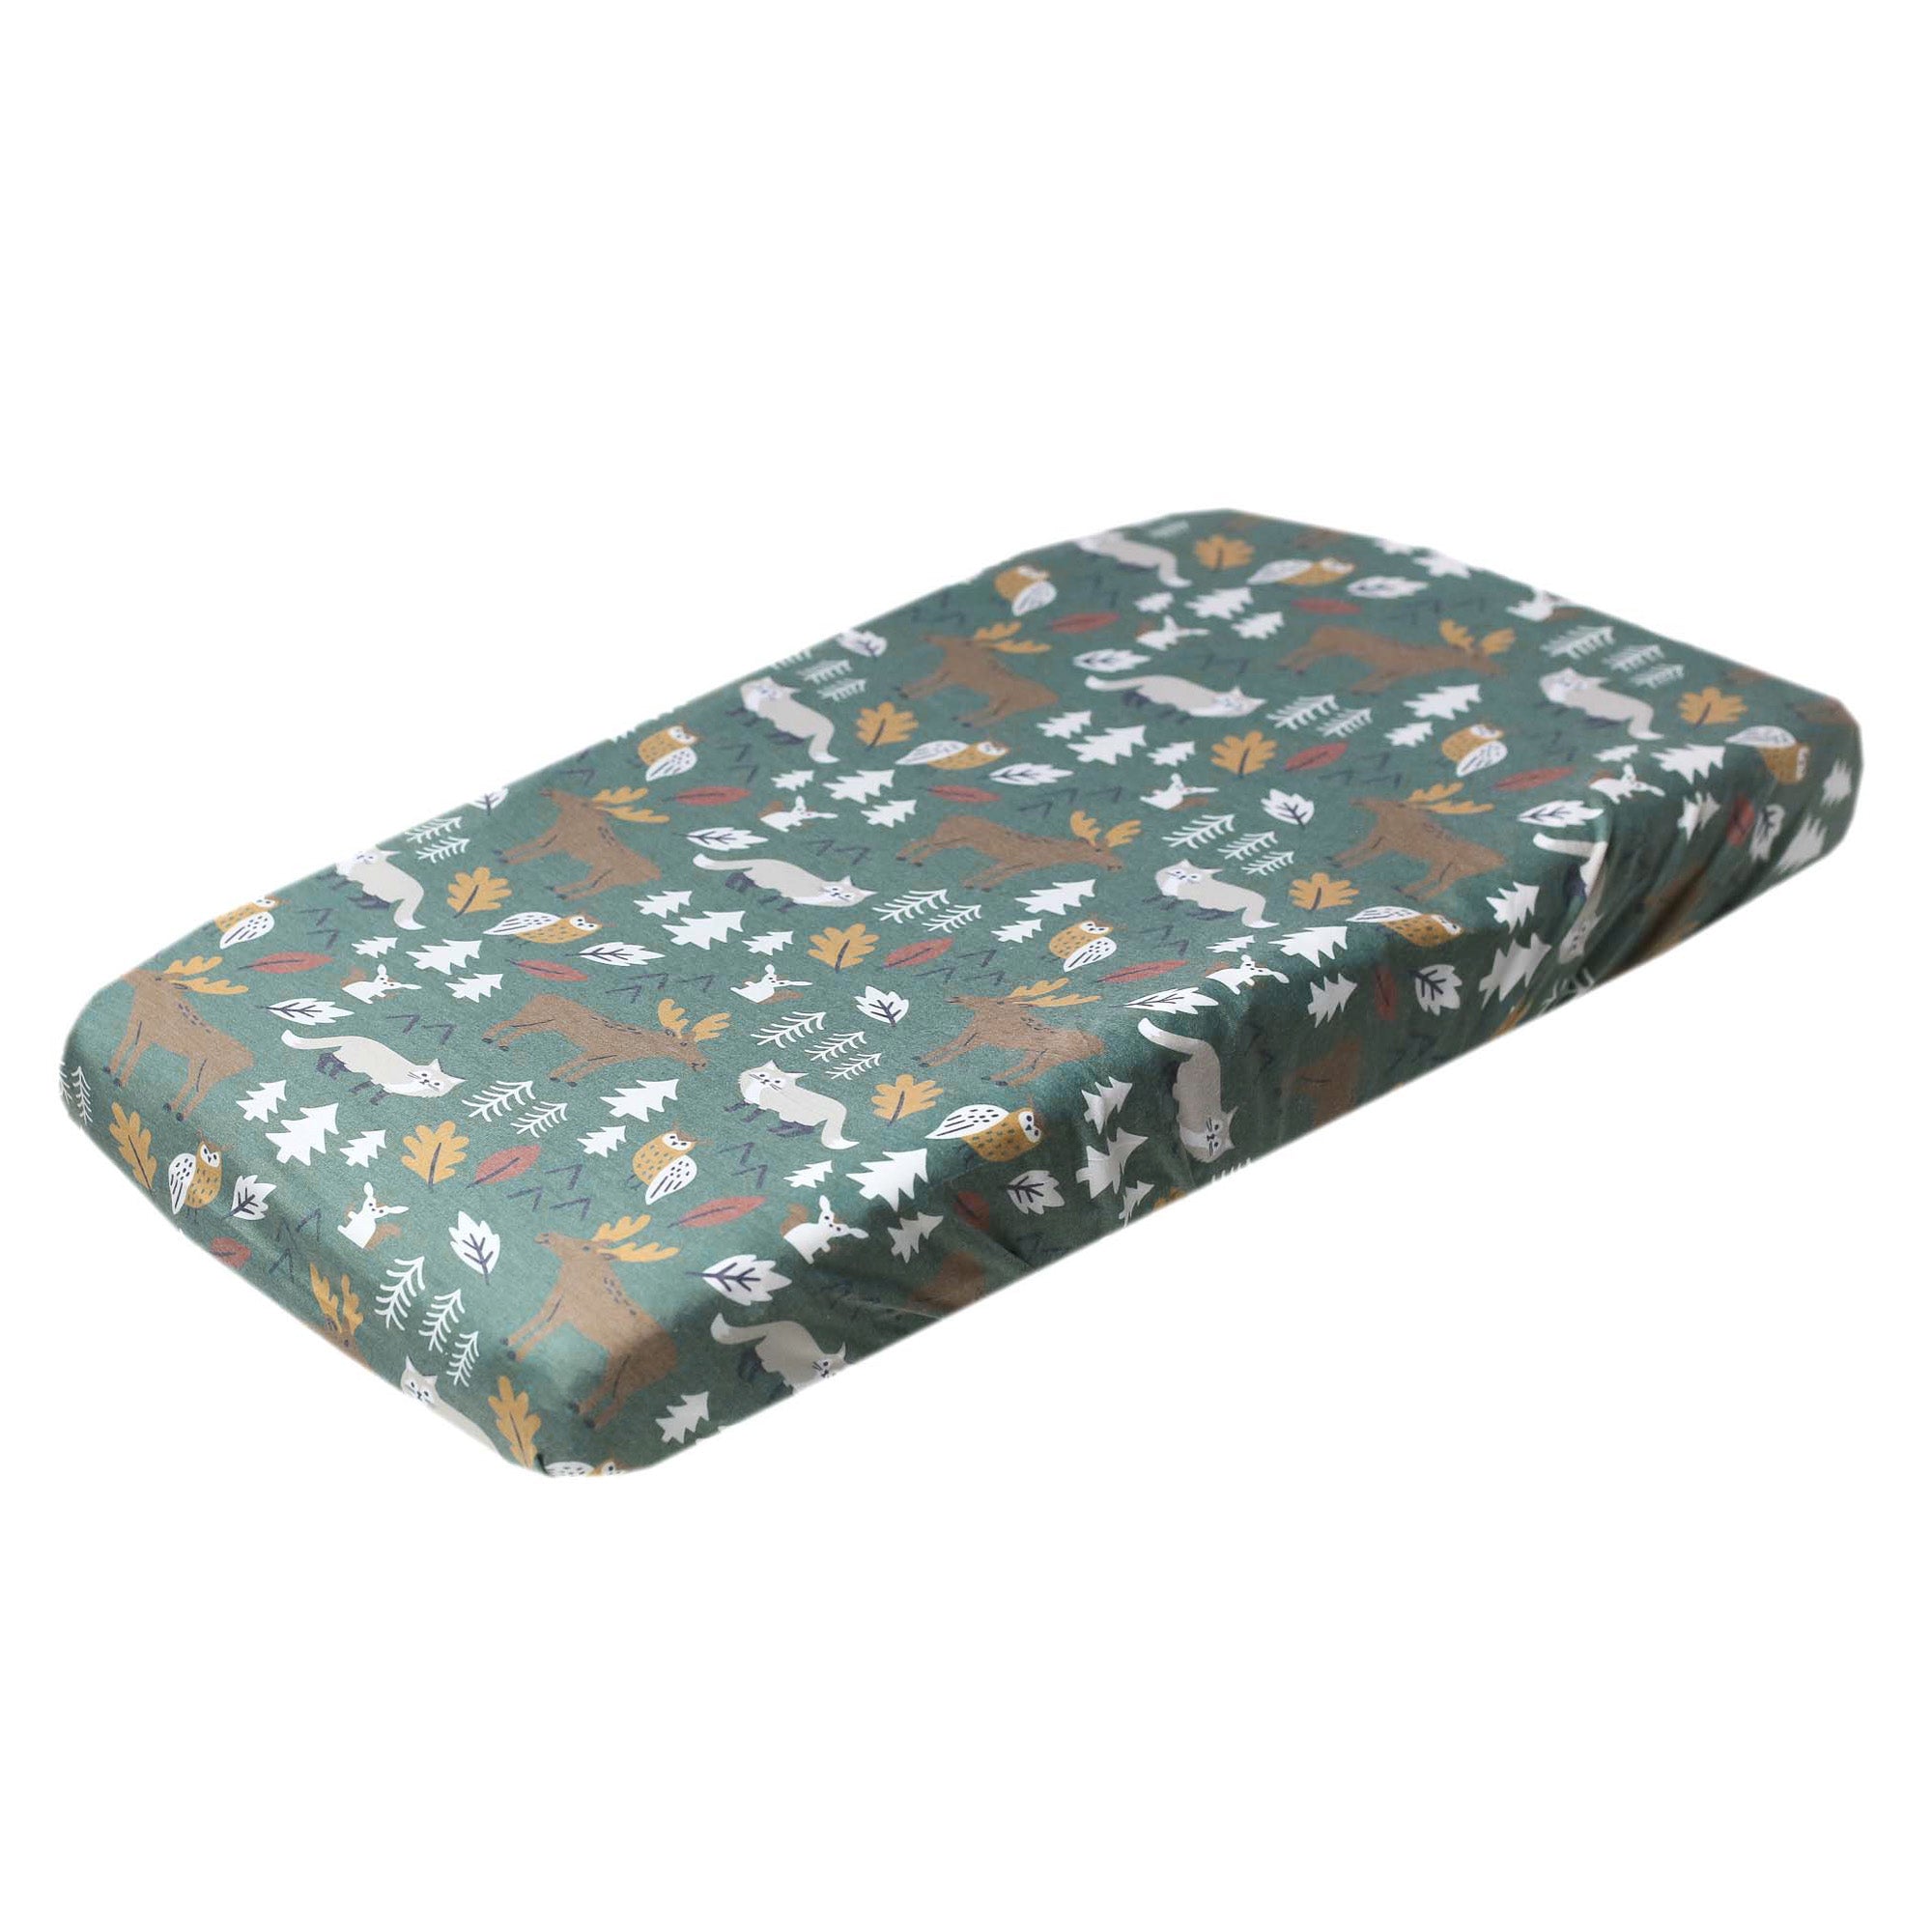 Premium Knit Diaper Changing Pad Cover - Atwood